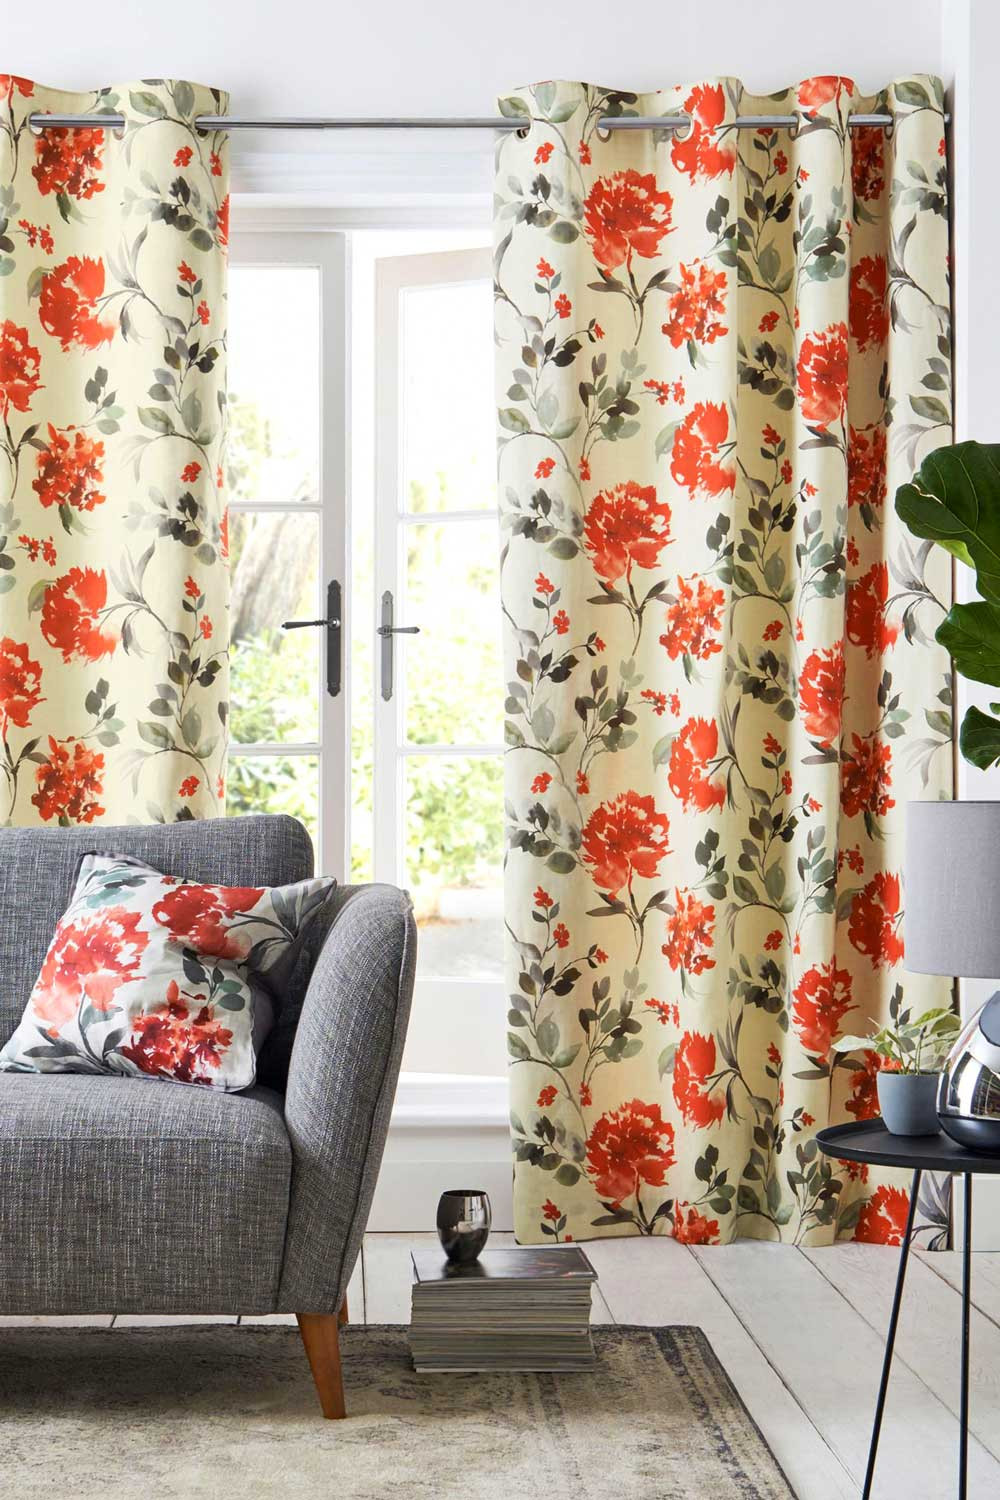 Beautiful Curtains For Living Room
 30 Beautiful Living Room Curtain Ideas and Patterns